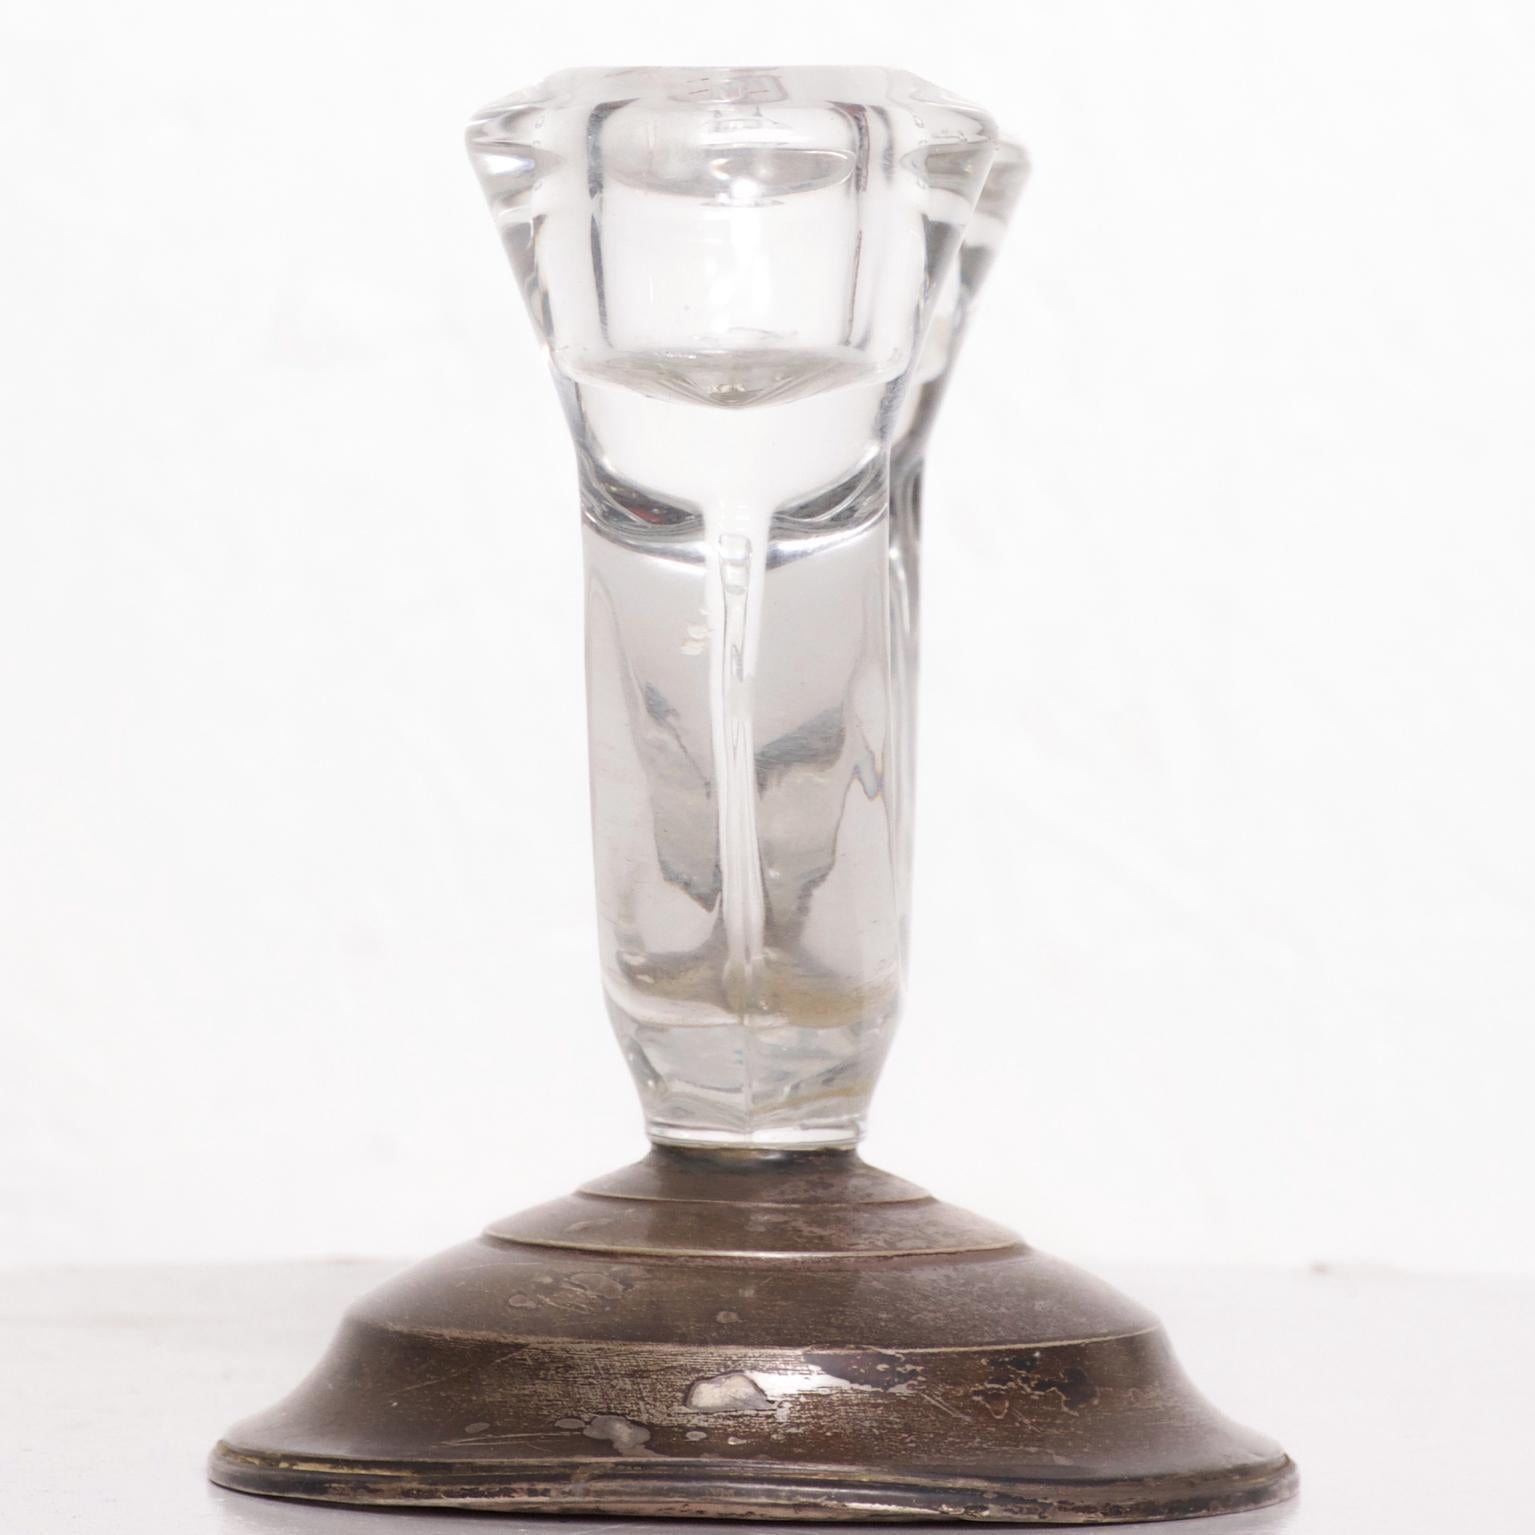 We are pleased to offer for your consideration a vintage candleholder or candlestick made by W M Rogers. The base is made of sterling silver and the top section is made of glass. Made in the USA circa 1960s. Dimensions: 5